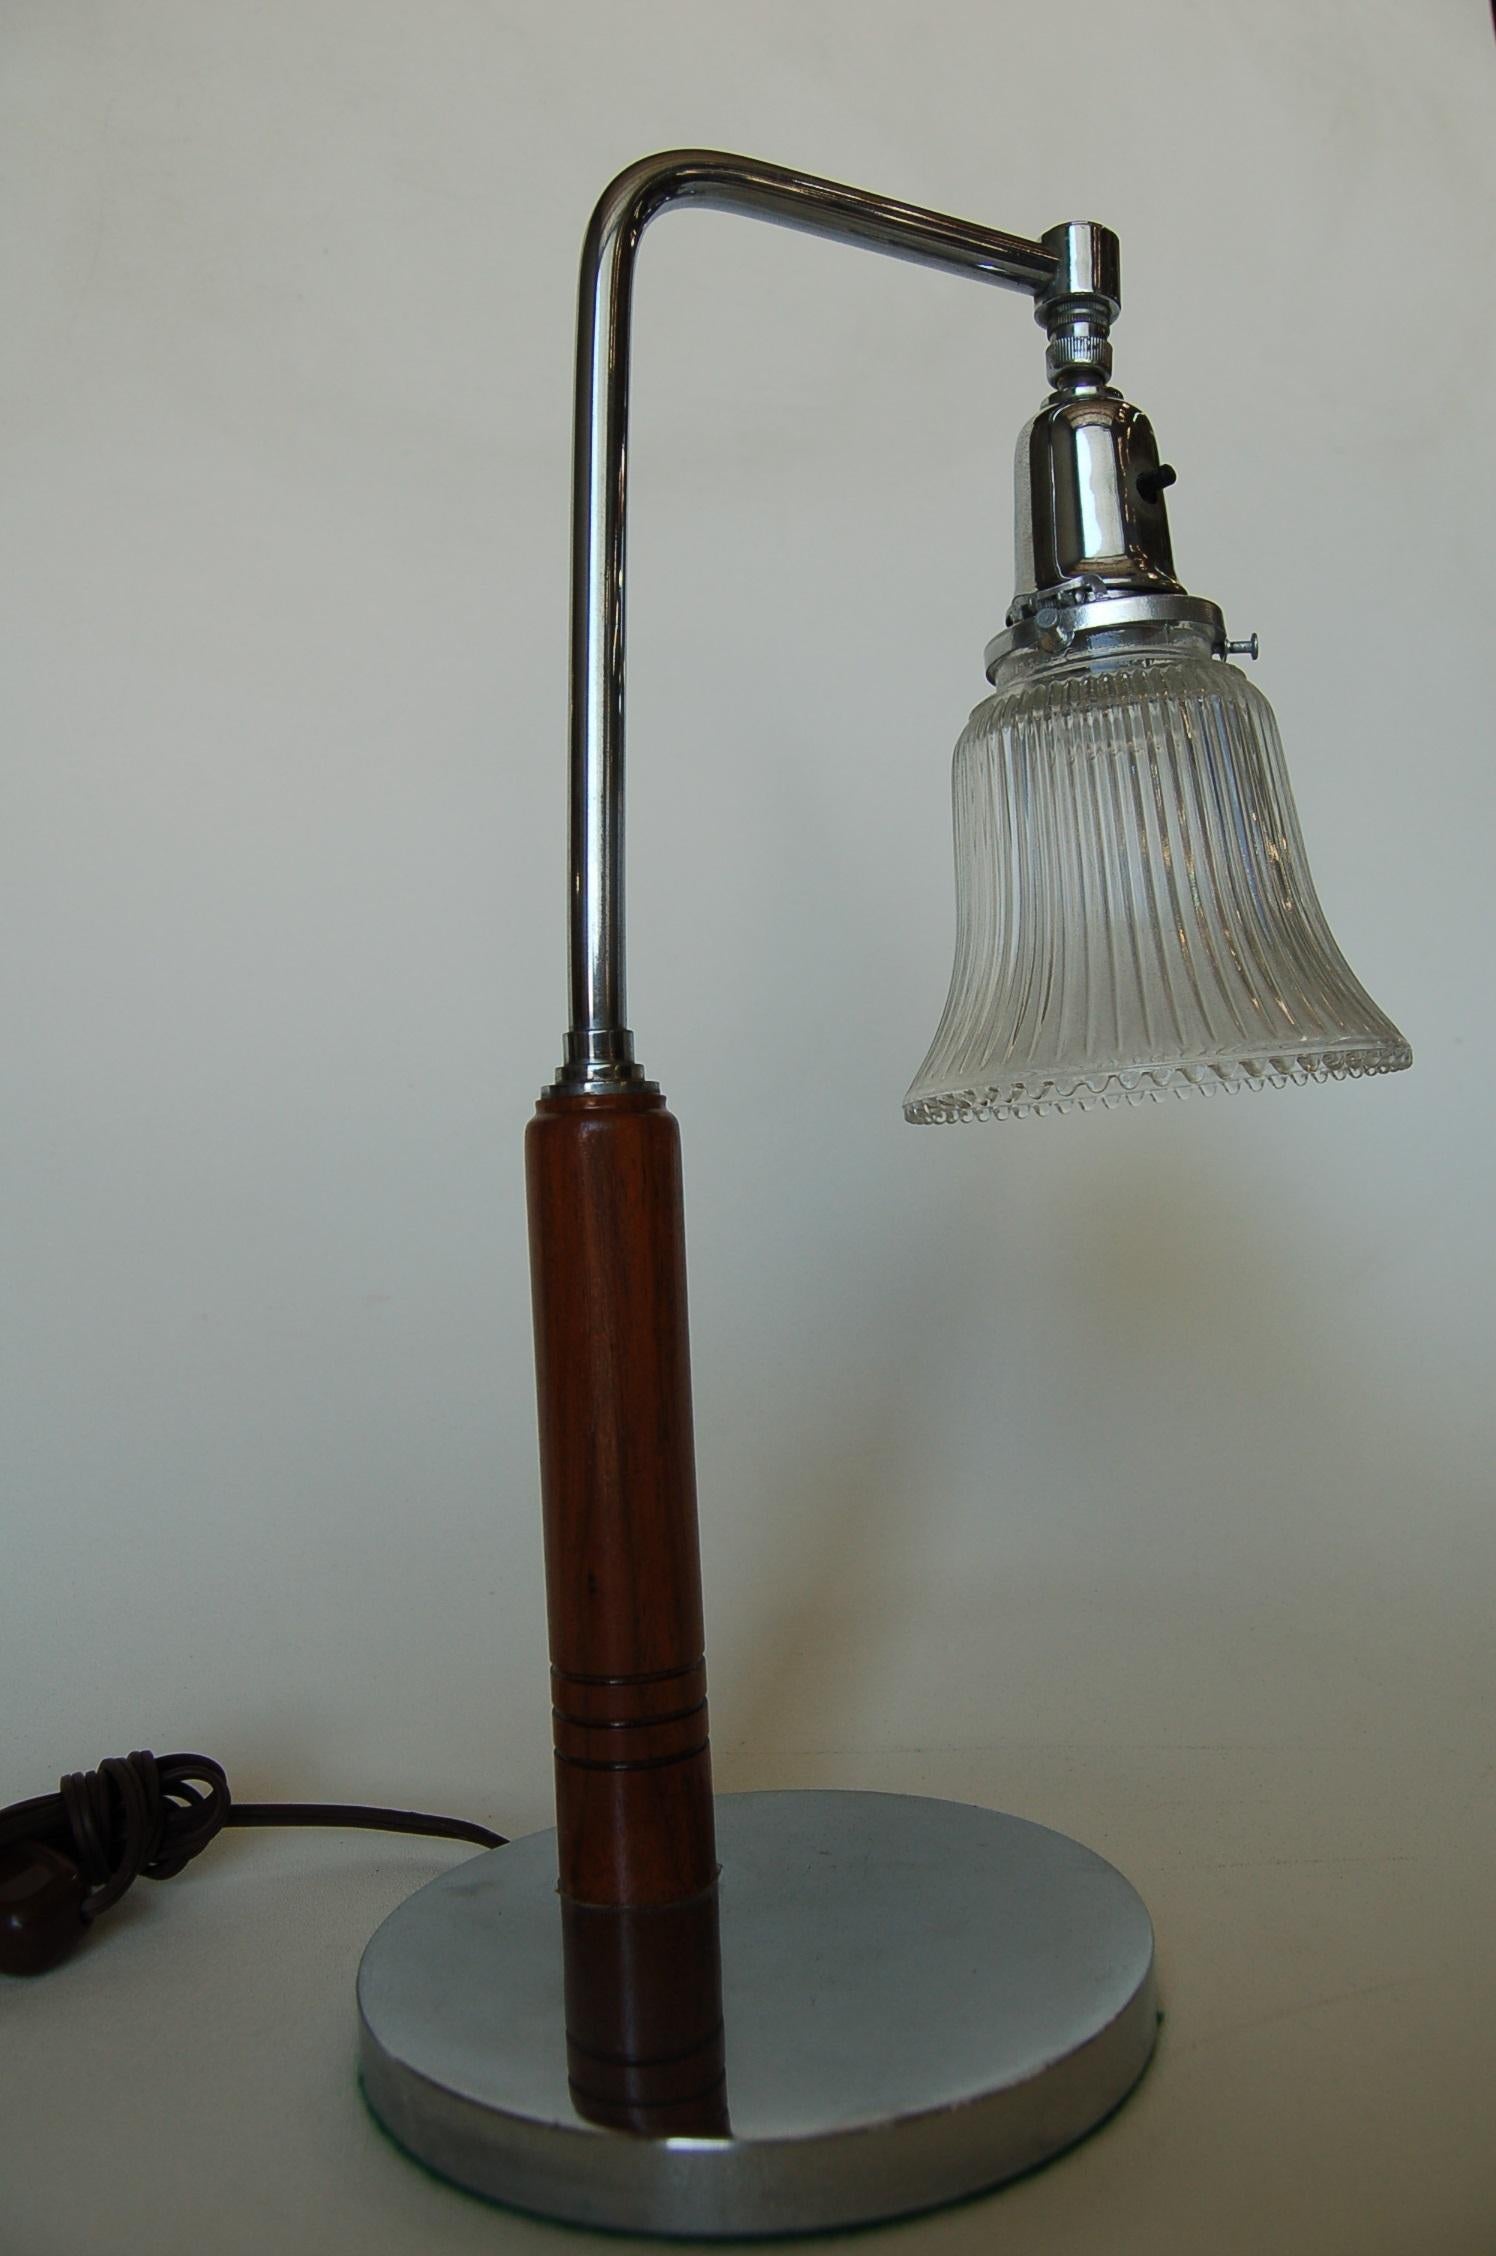 Art Deco desk table lamp bell shape glass shade and wood and chrome trim.

Measures: 9